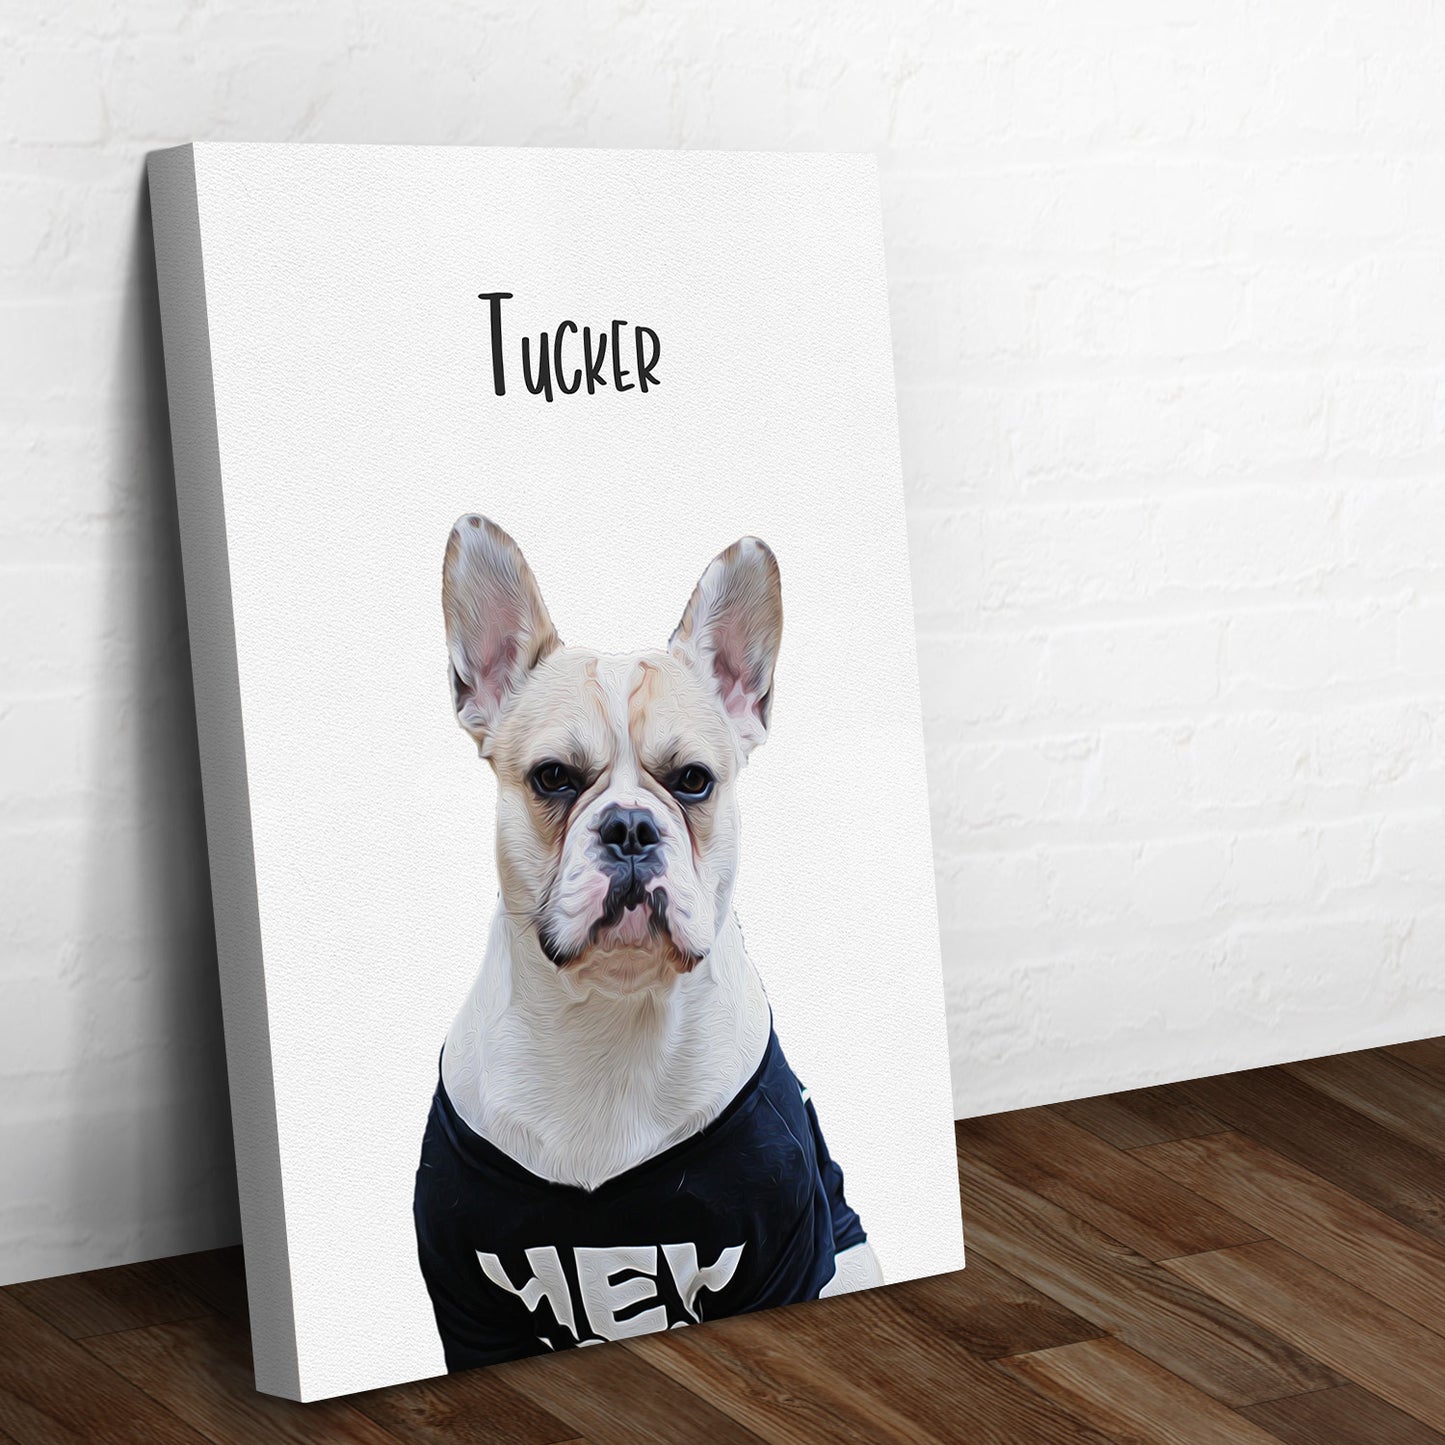 Pet Canvas Sign Style 3 - Image by Tailored Canvases